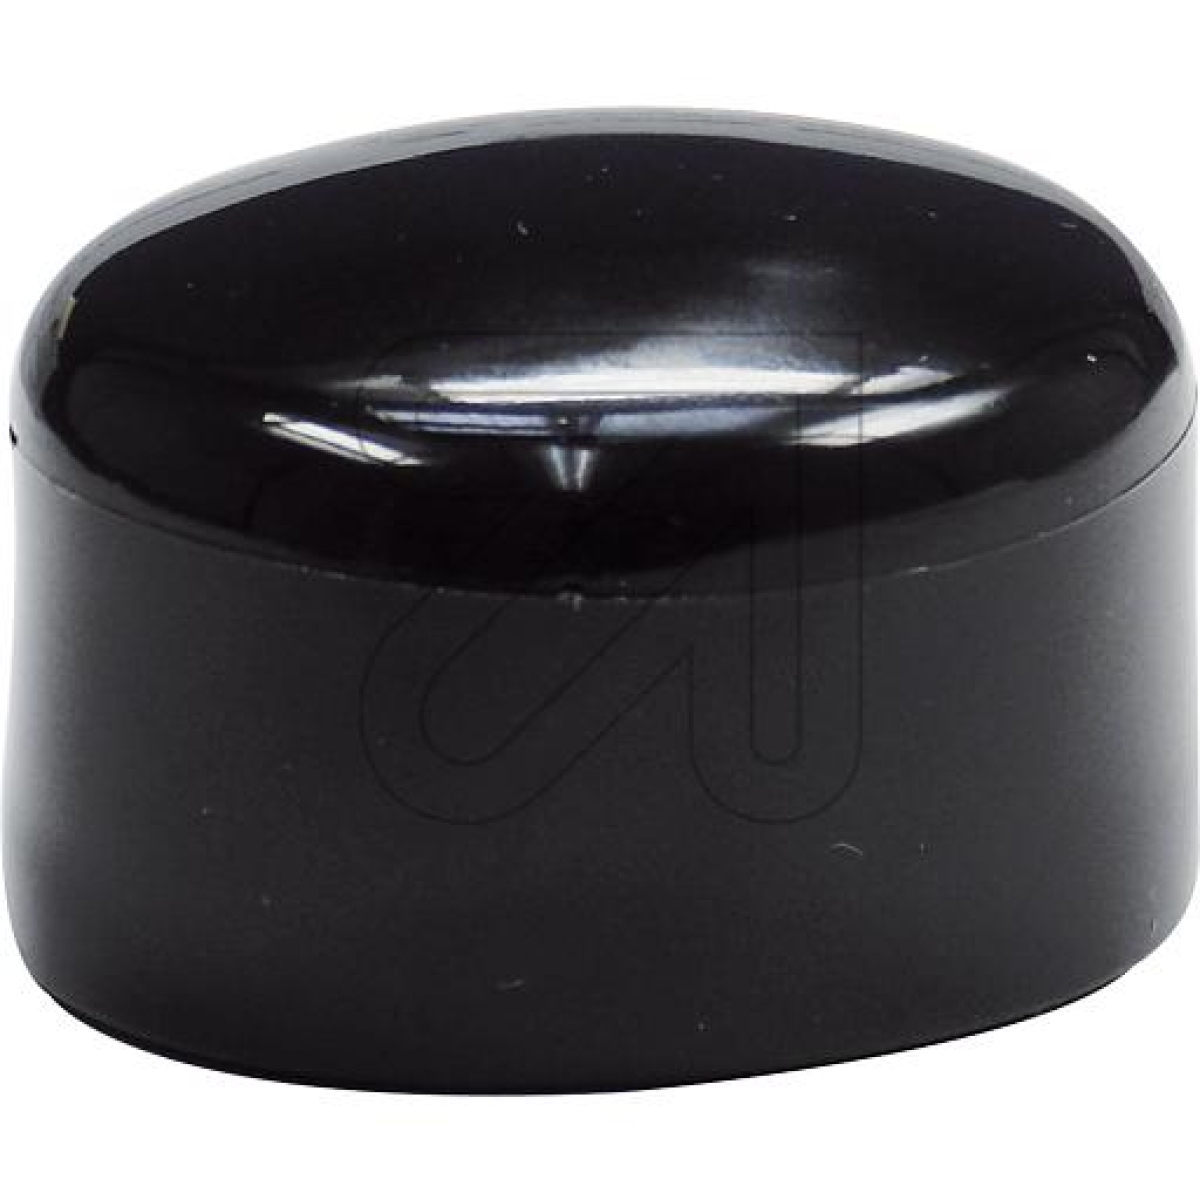 bestMast cover cap 50mm-Price for 5 pcs.Article-No: 253025